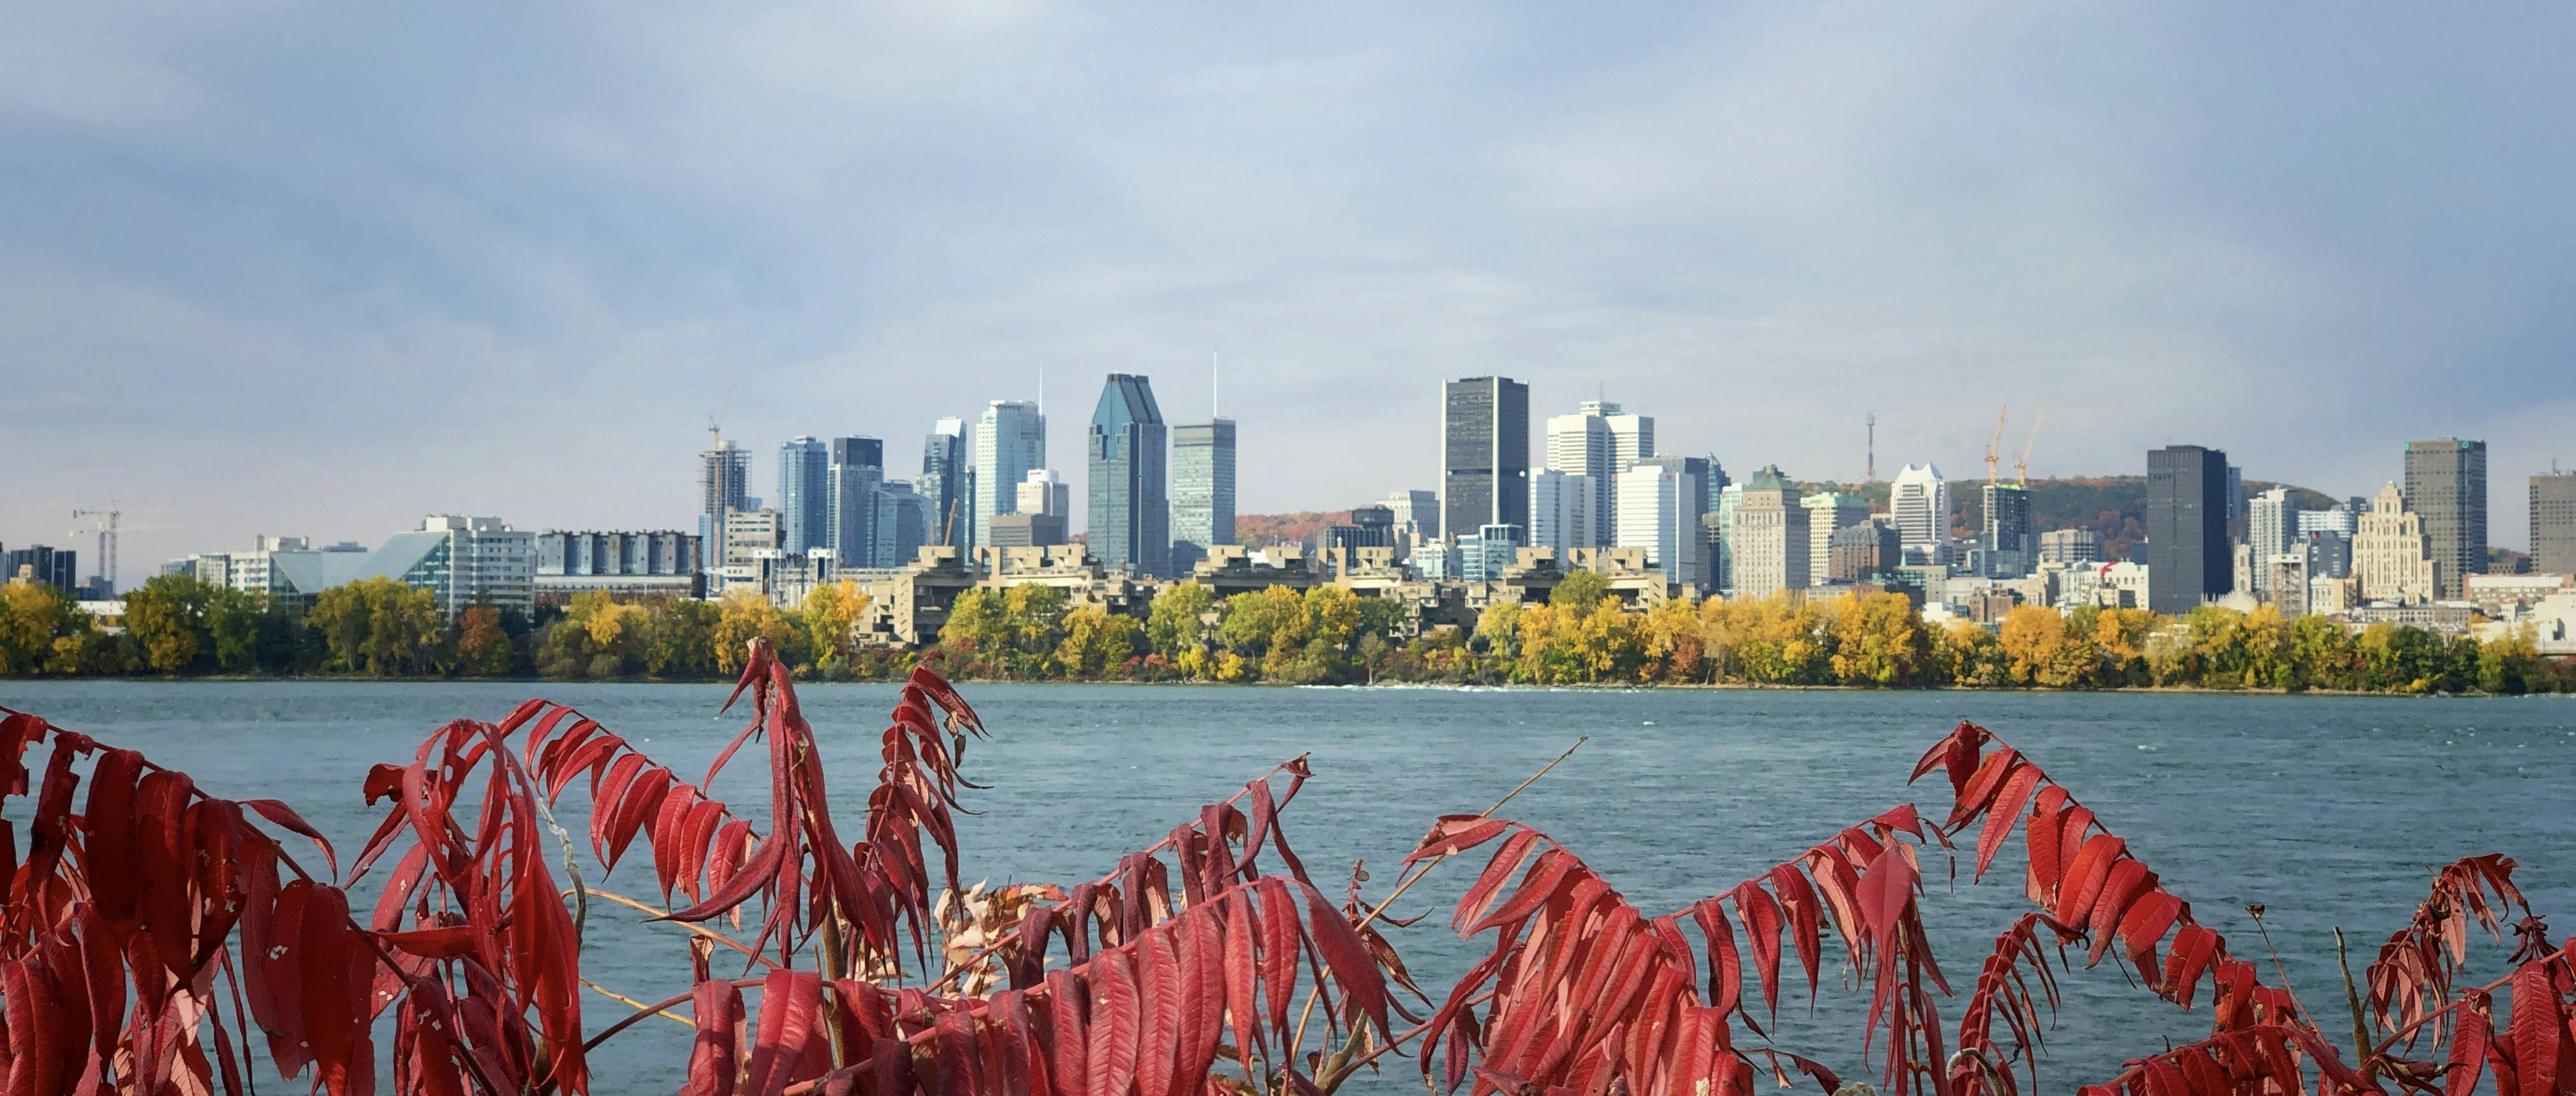 Montreal must-sees and hidden gems private walking tour